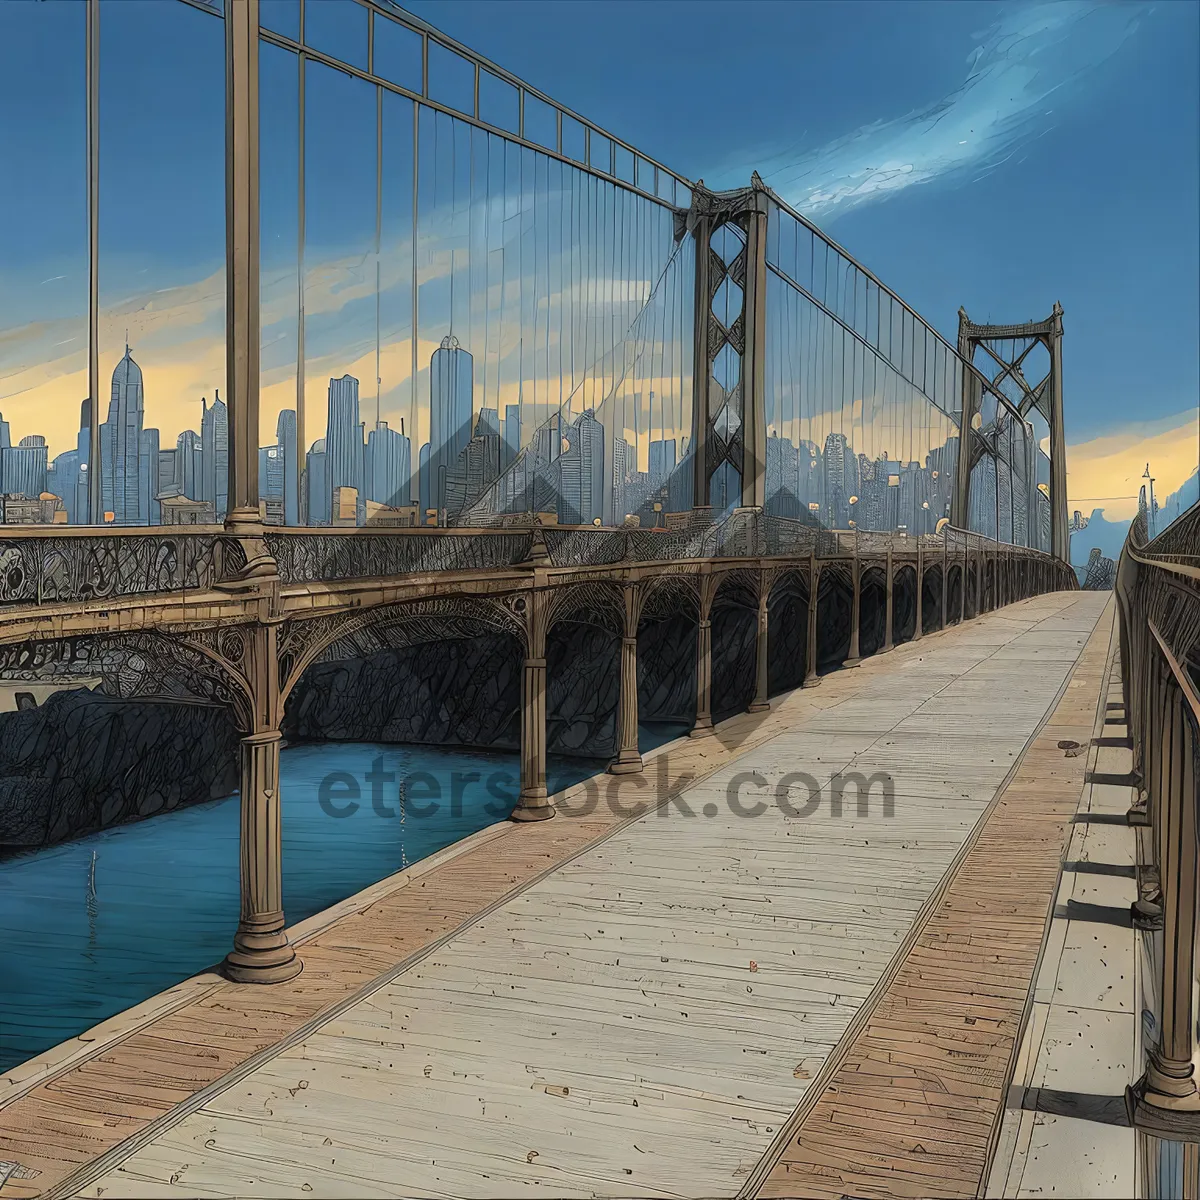 Picture of Iconic Golden Gate Bridge over Bay, San Francisco